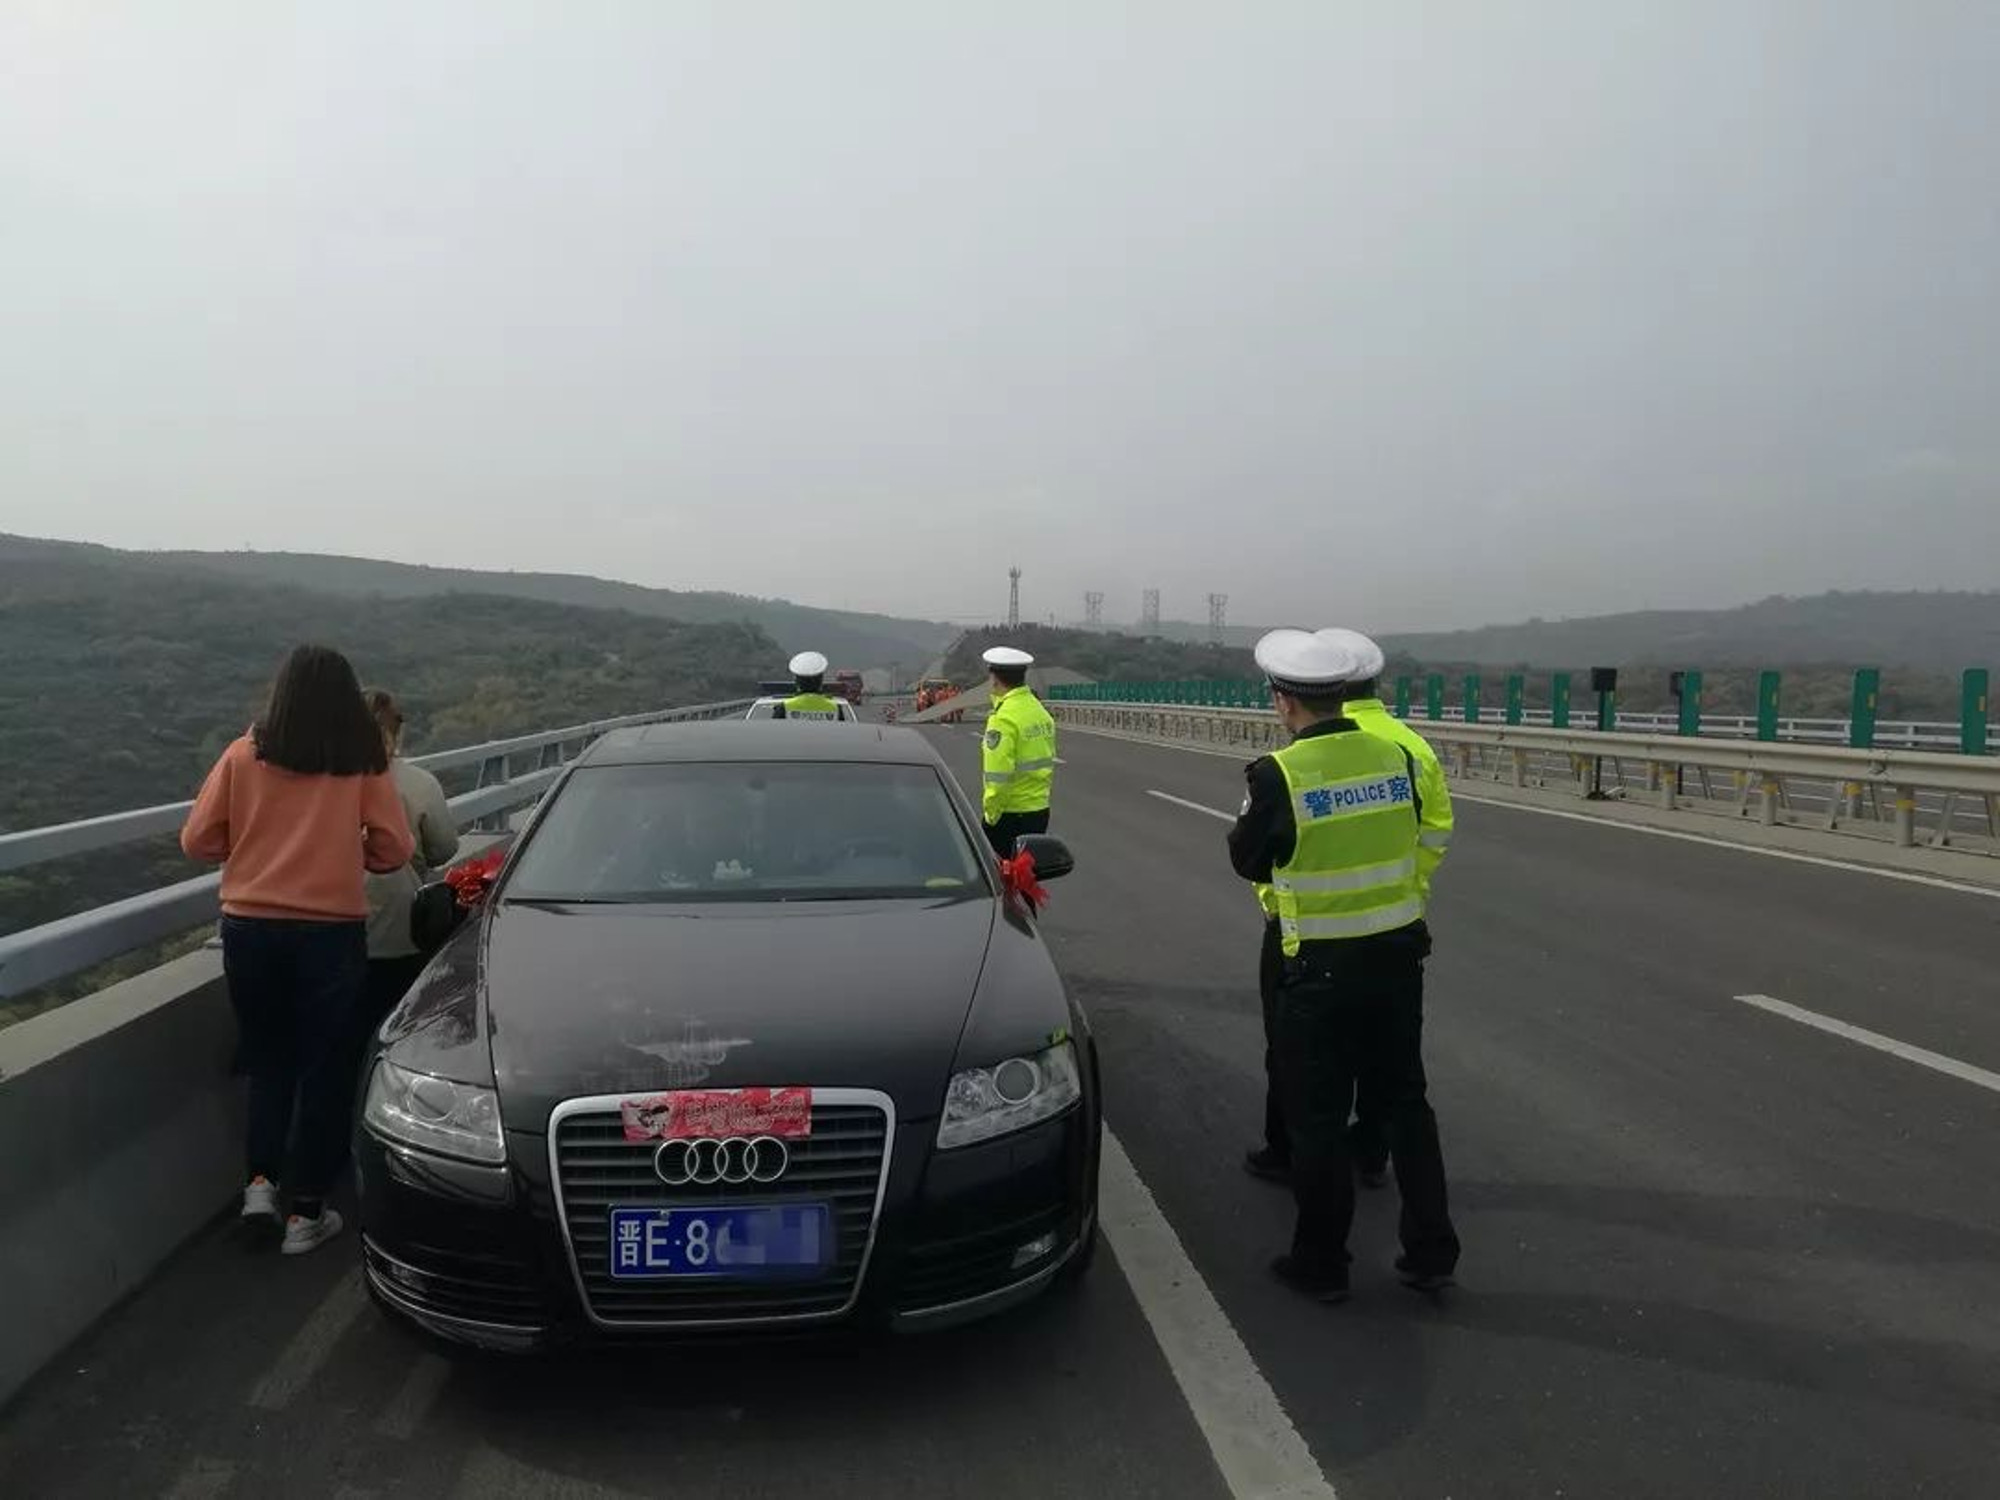 Read more about the article Metal Sheet Flies Off HVG On Motorway And Hits Audi